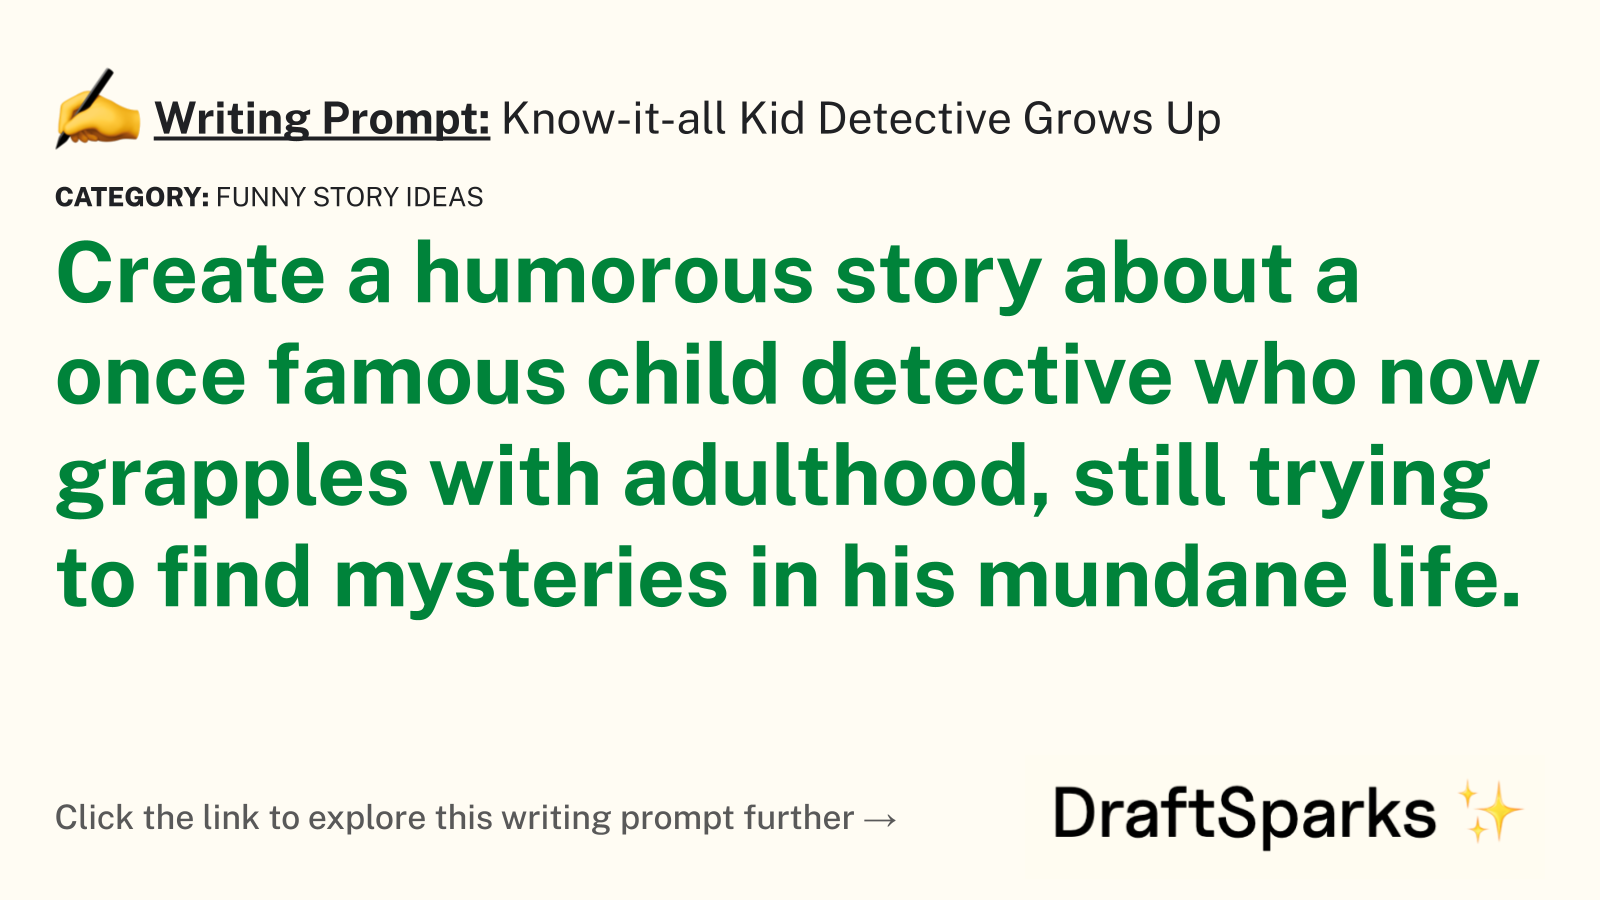 Know-it-all Kid Detective Grows Up